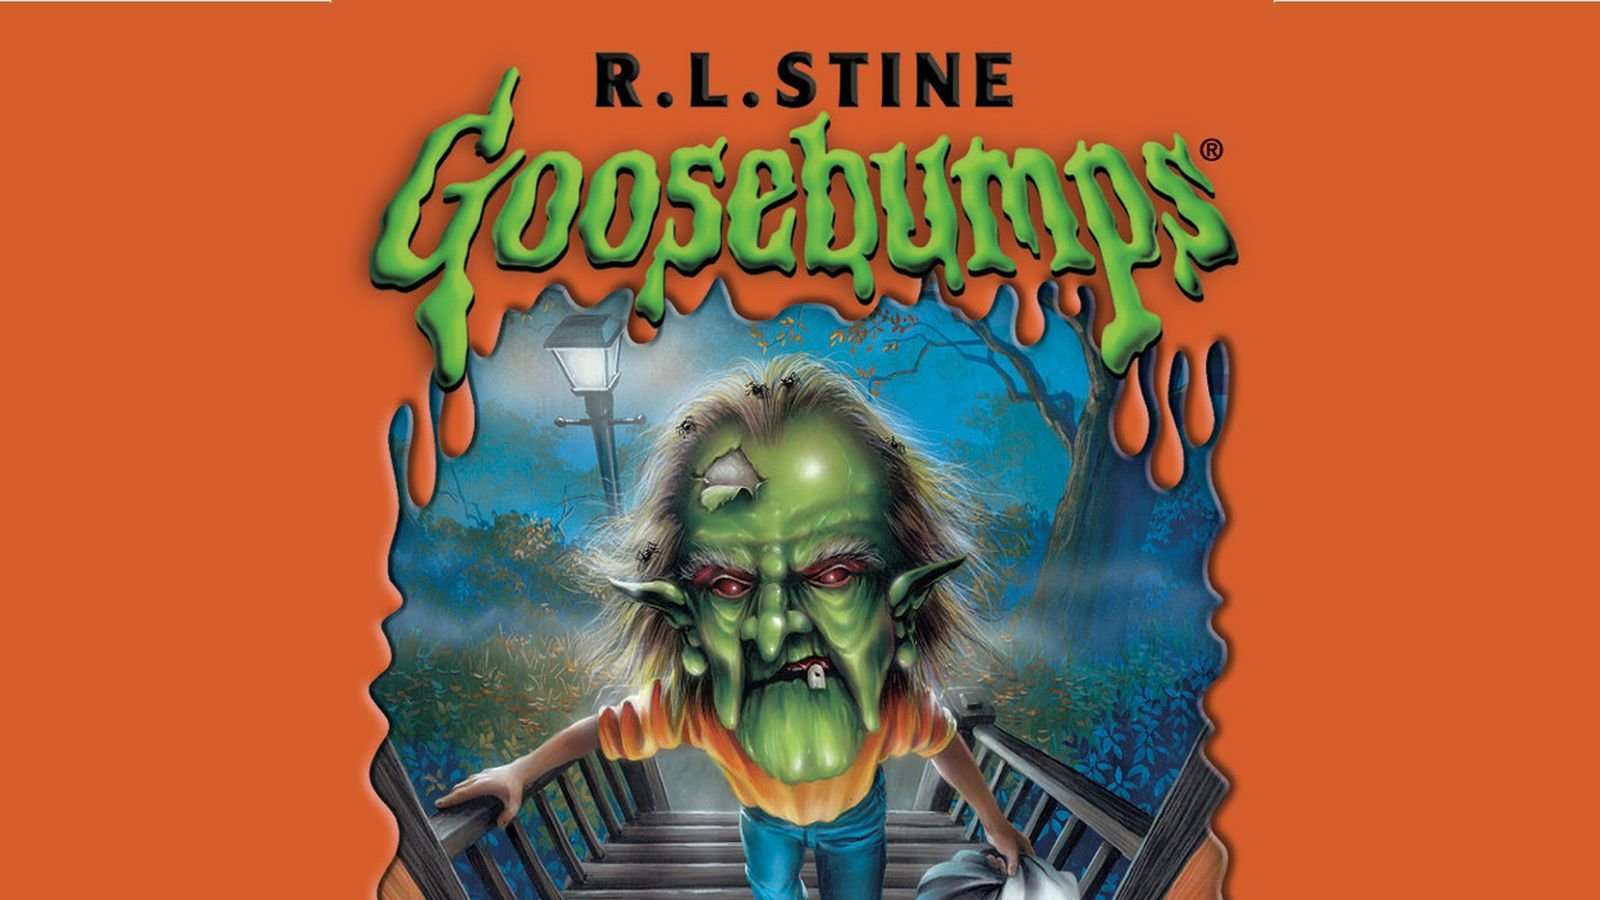 image for 'I never wanted to be scary': an interview with R. L. Stine